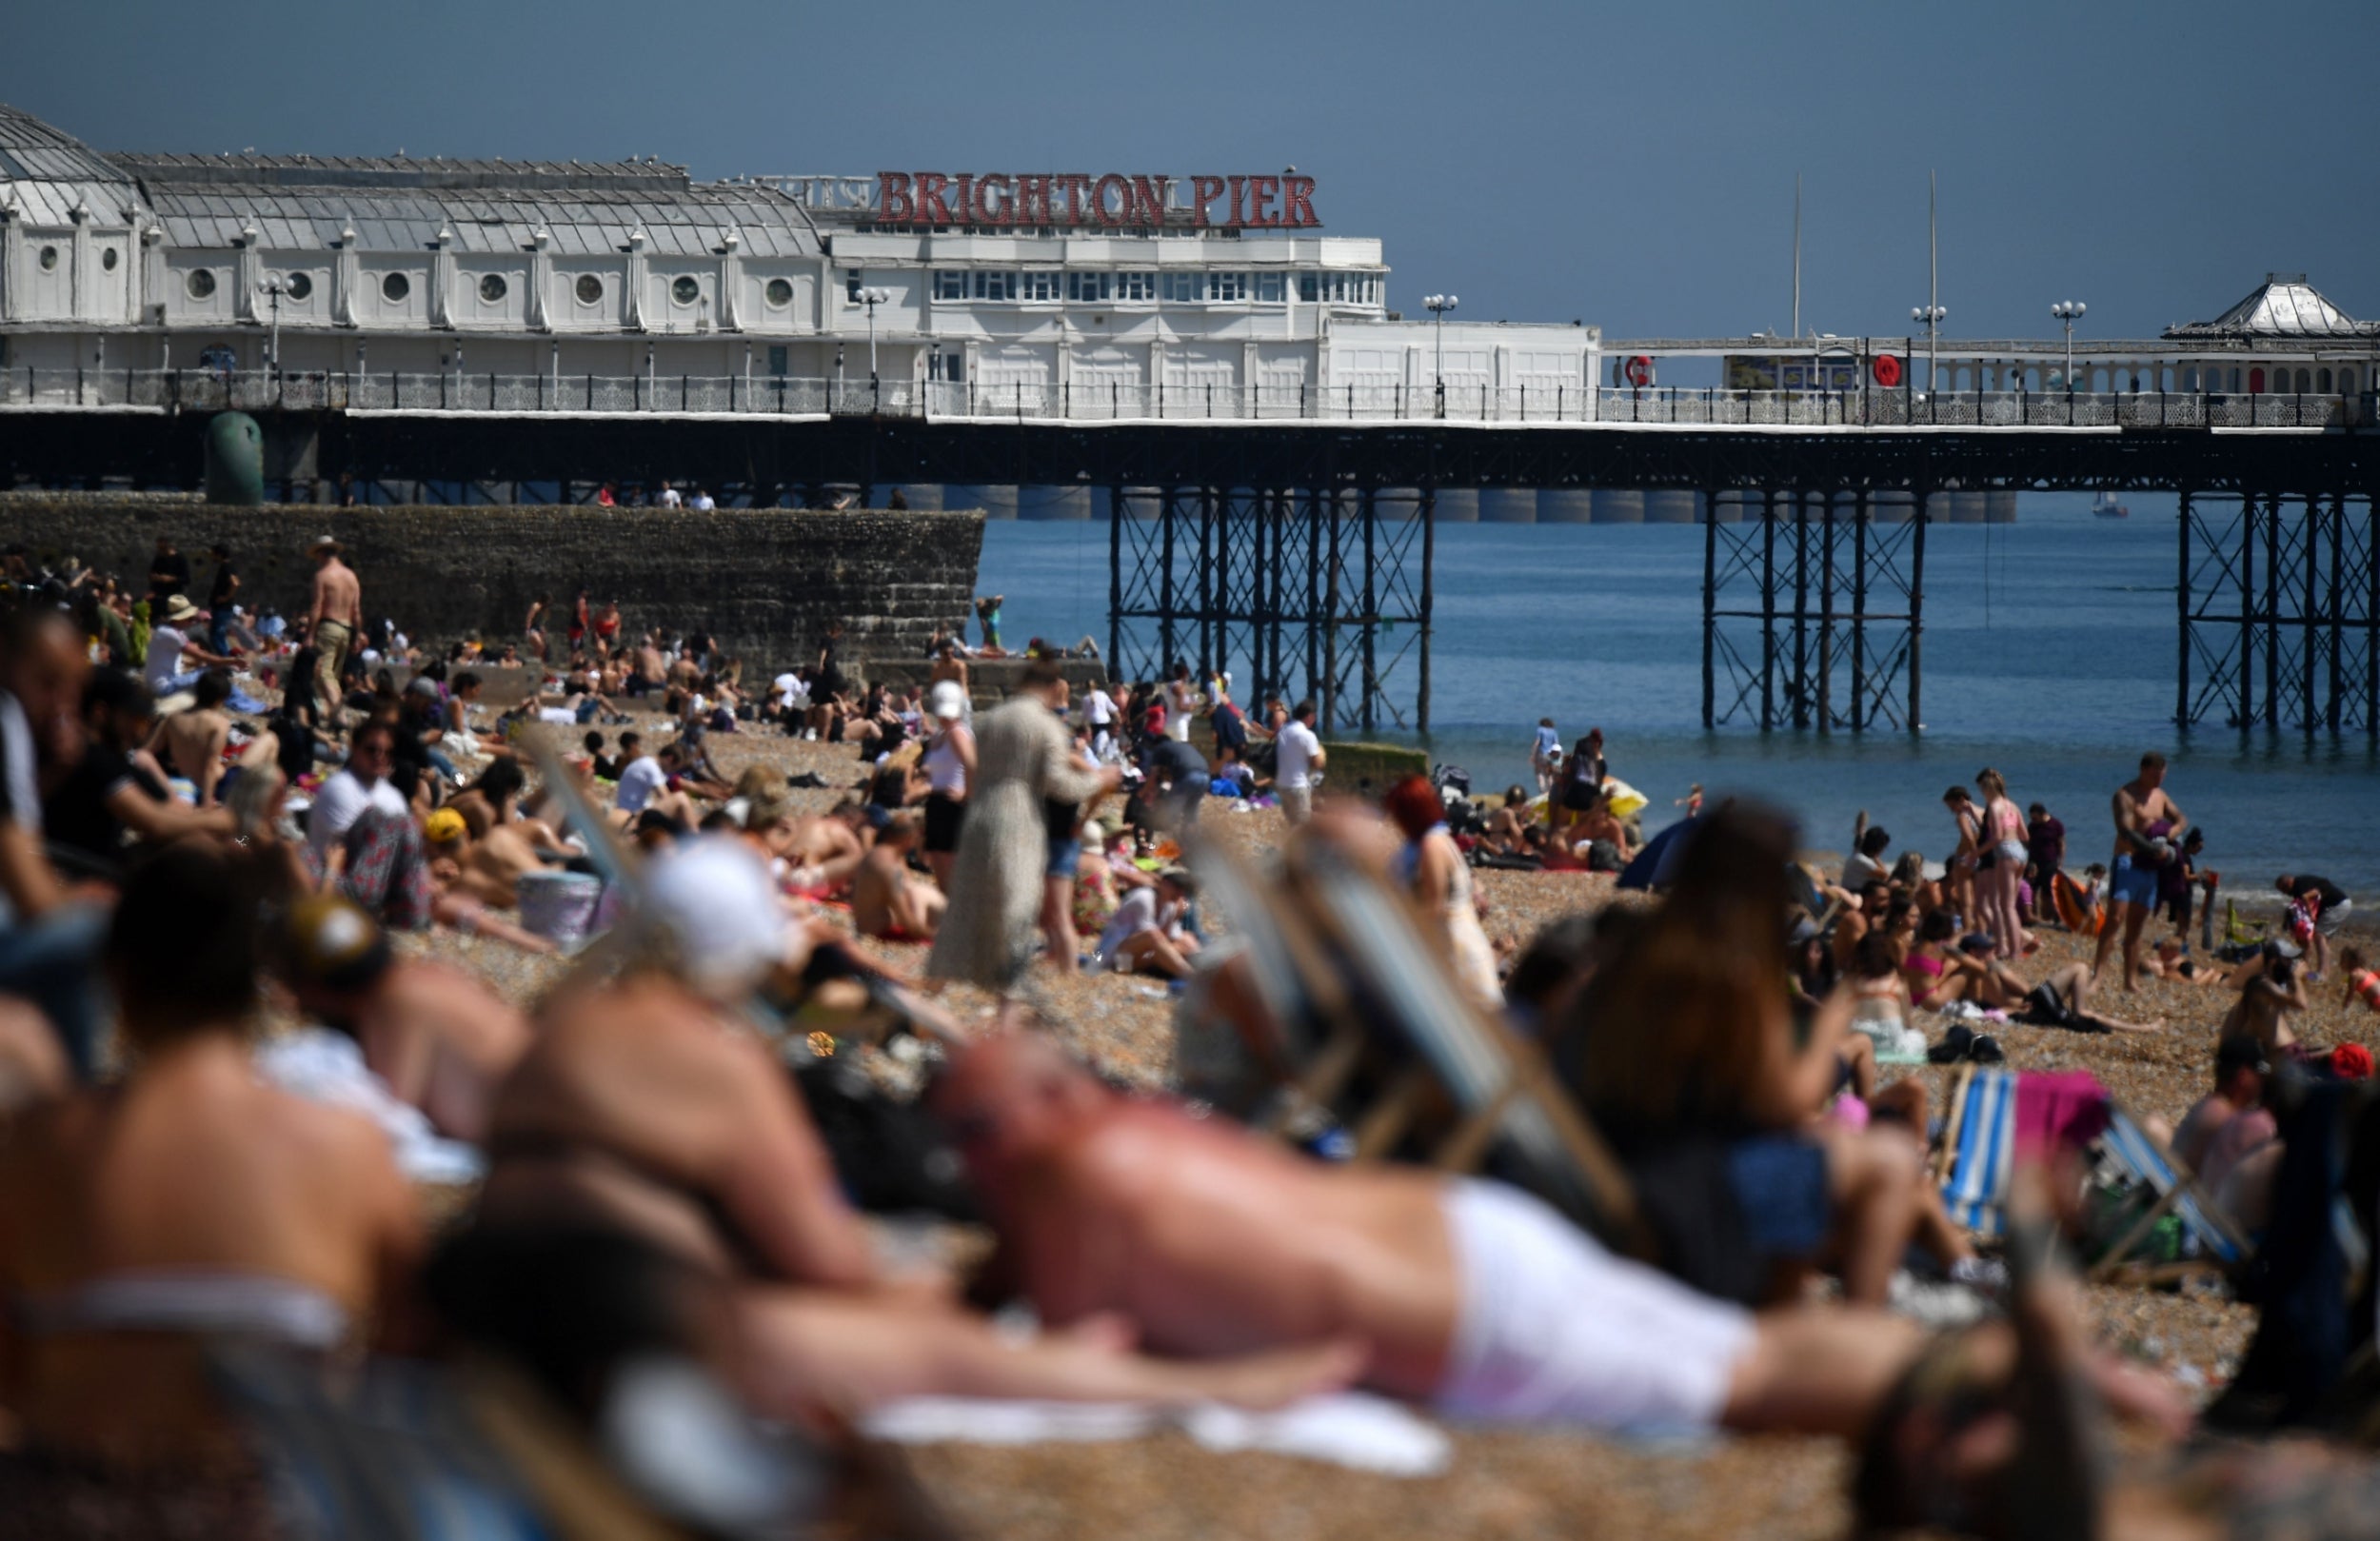 Despite guidance urging people to stay 2m apart to limit the spread of coronavirus, thousands crammed onto the seafront in Brighton